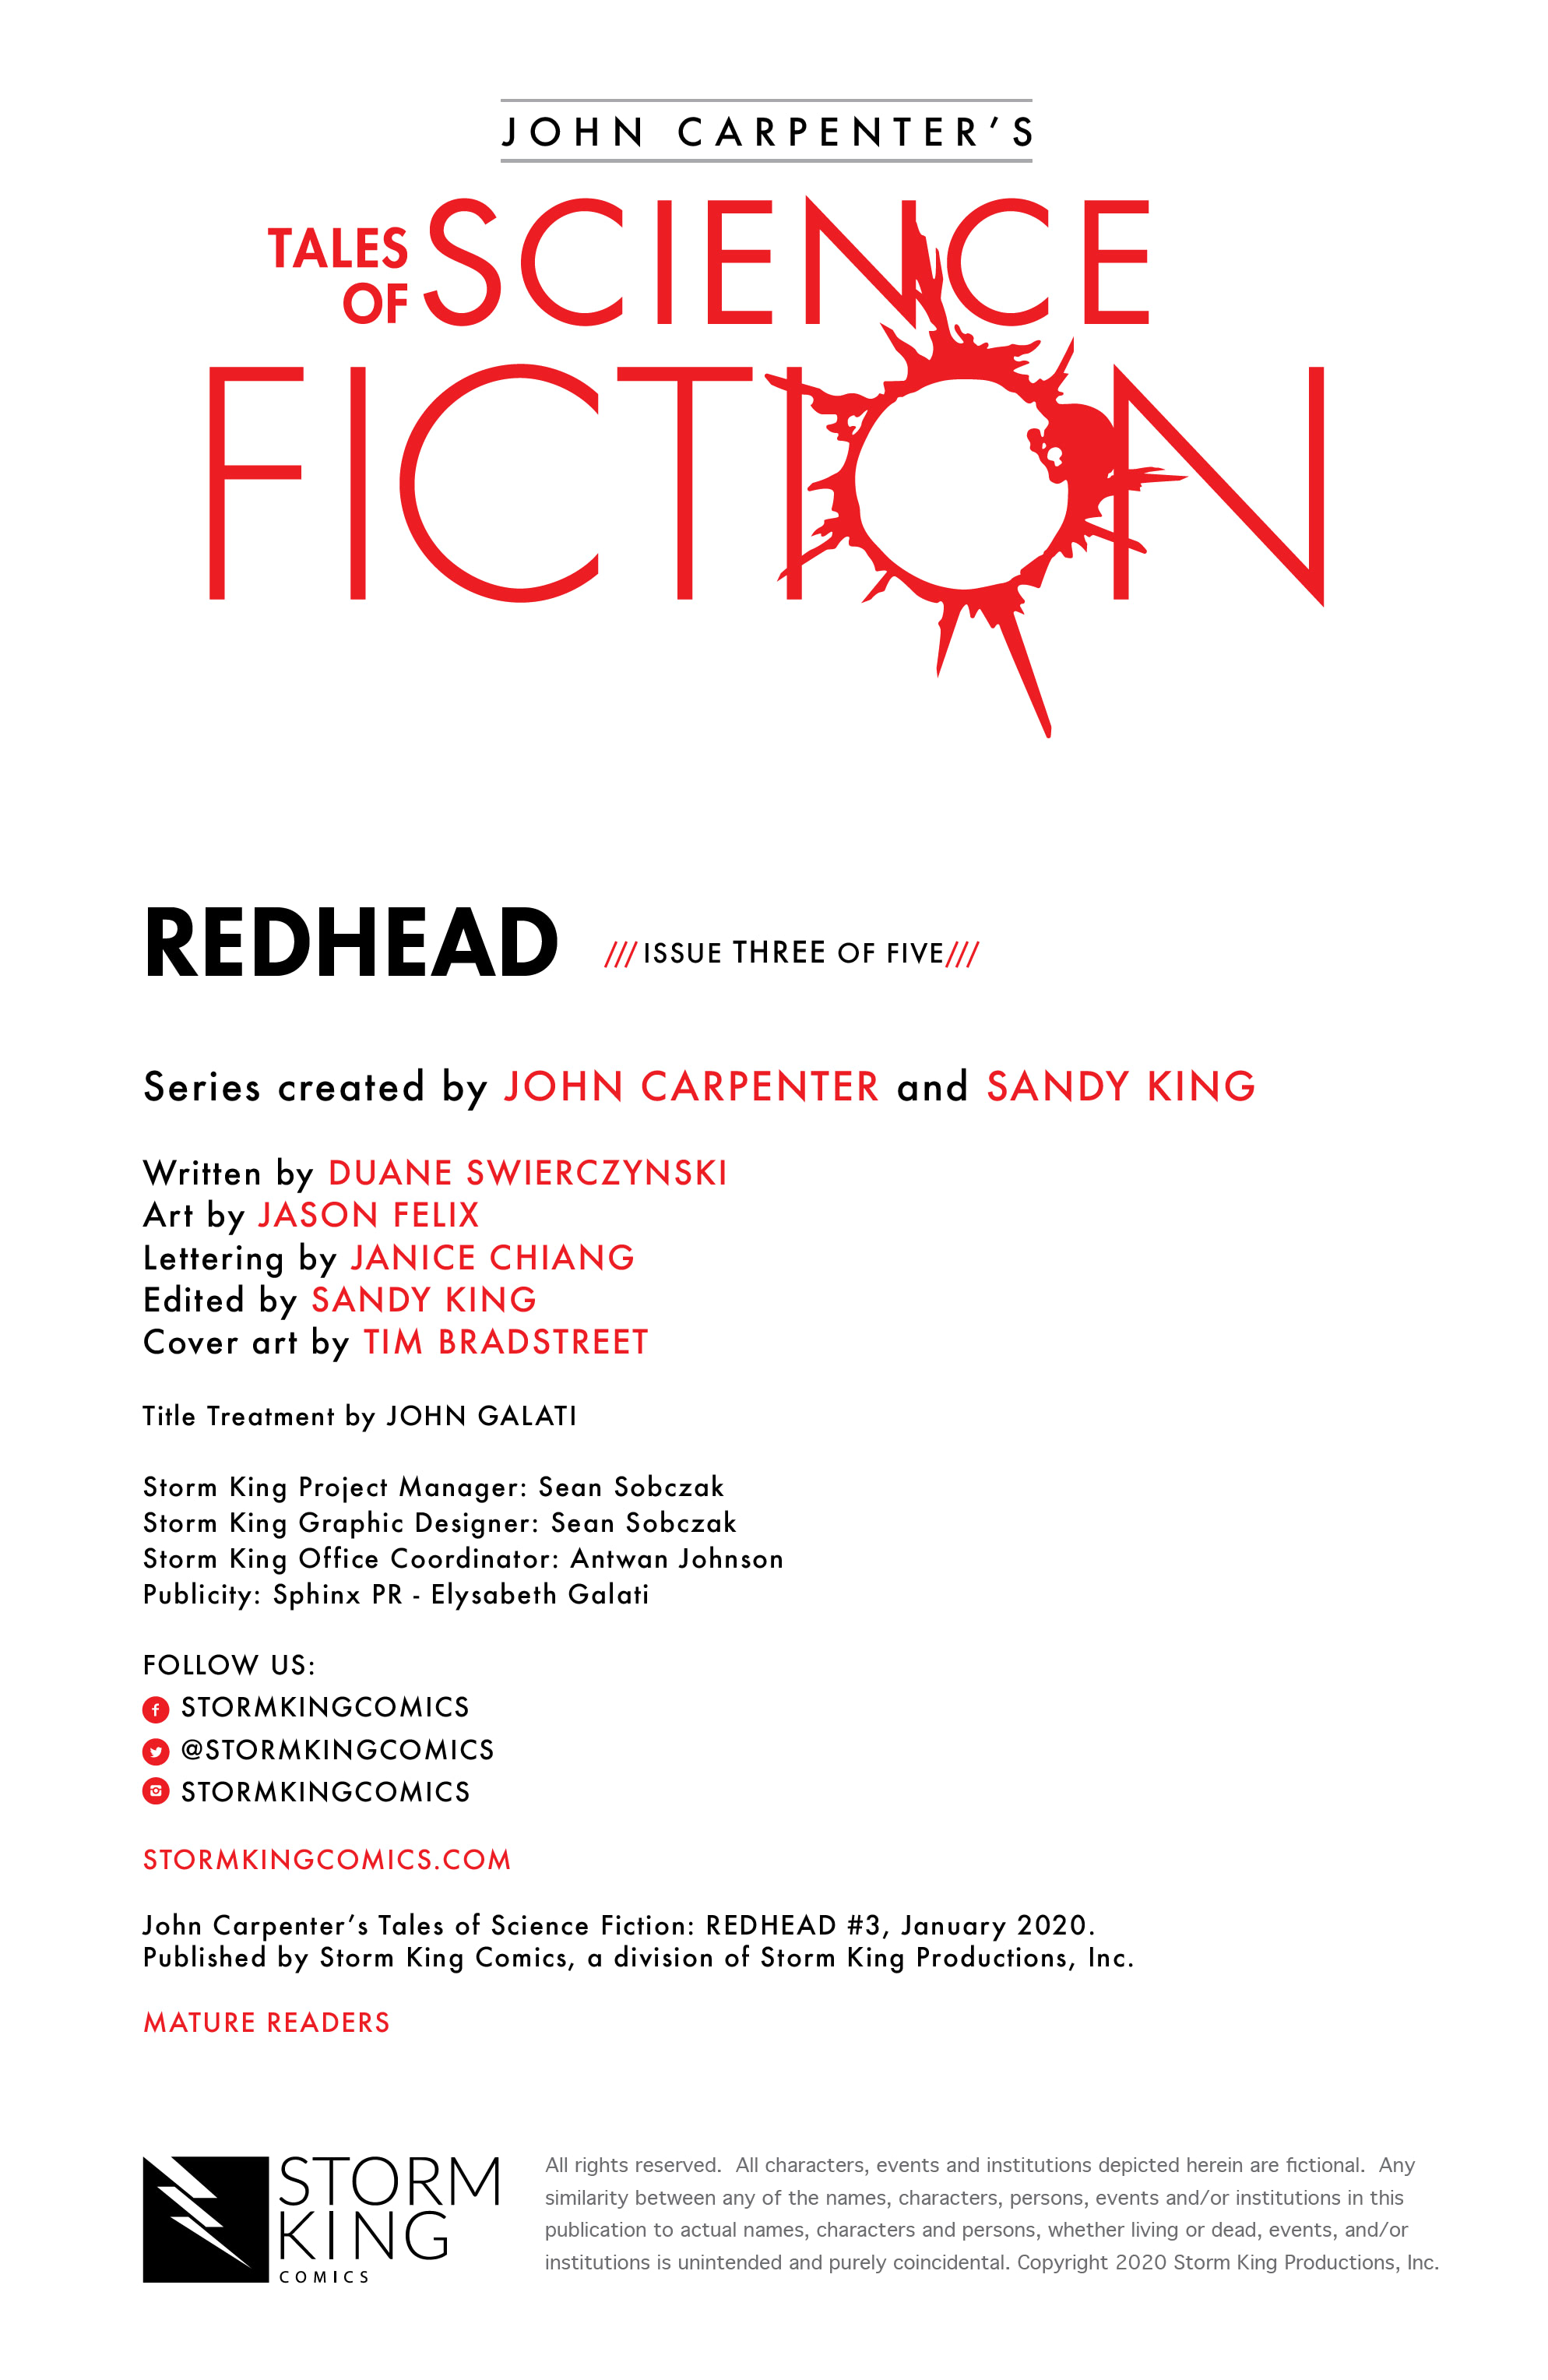 Read online John Carpenter's Tales of Science Fiction: Redhead comic -  Issue #3 - 2